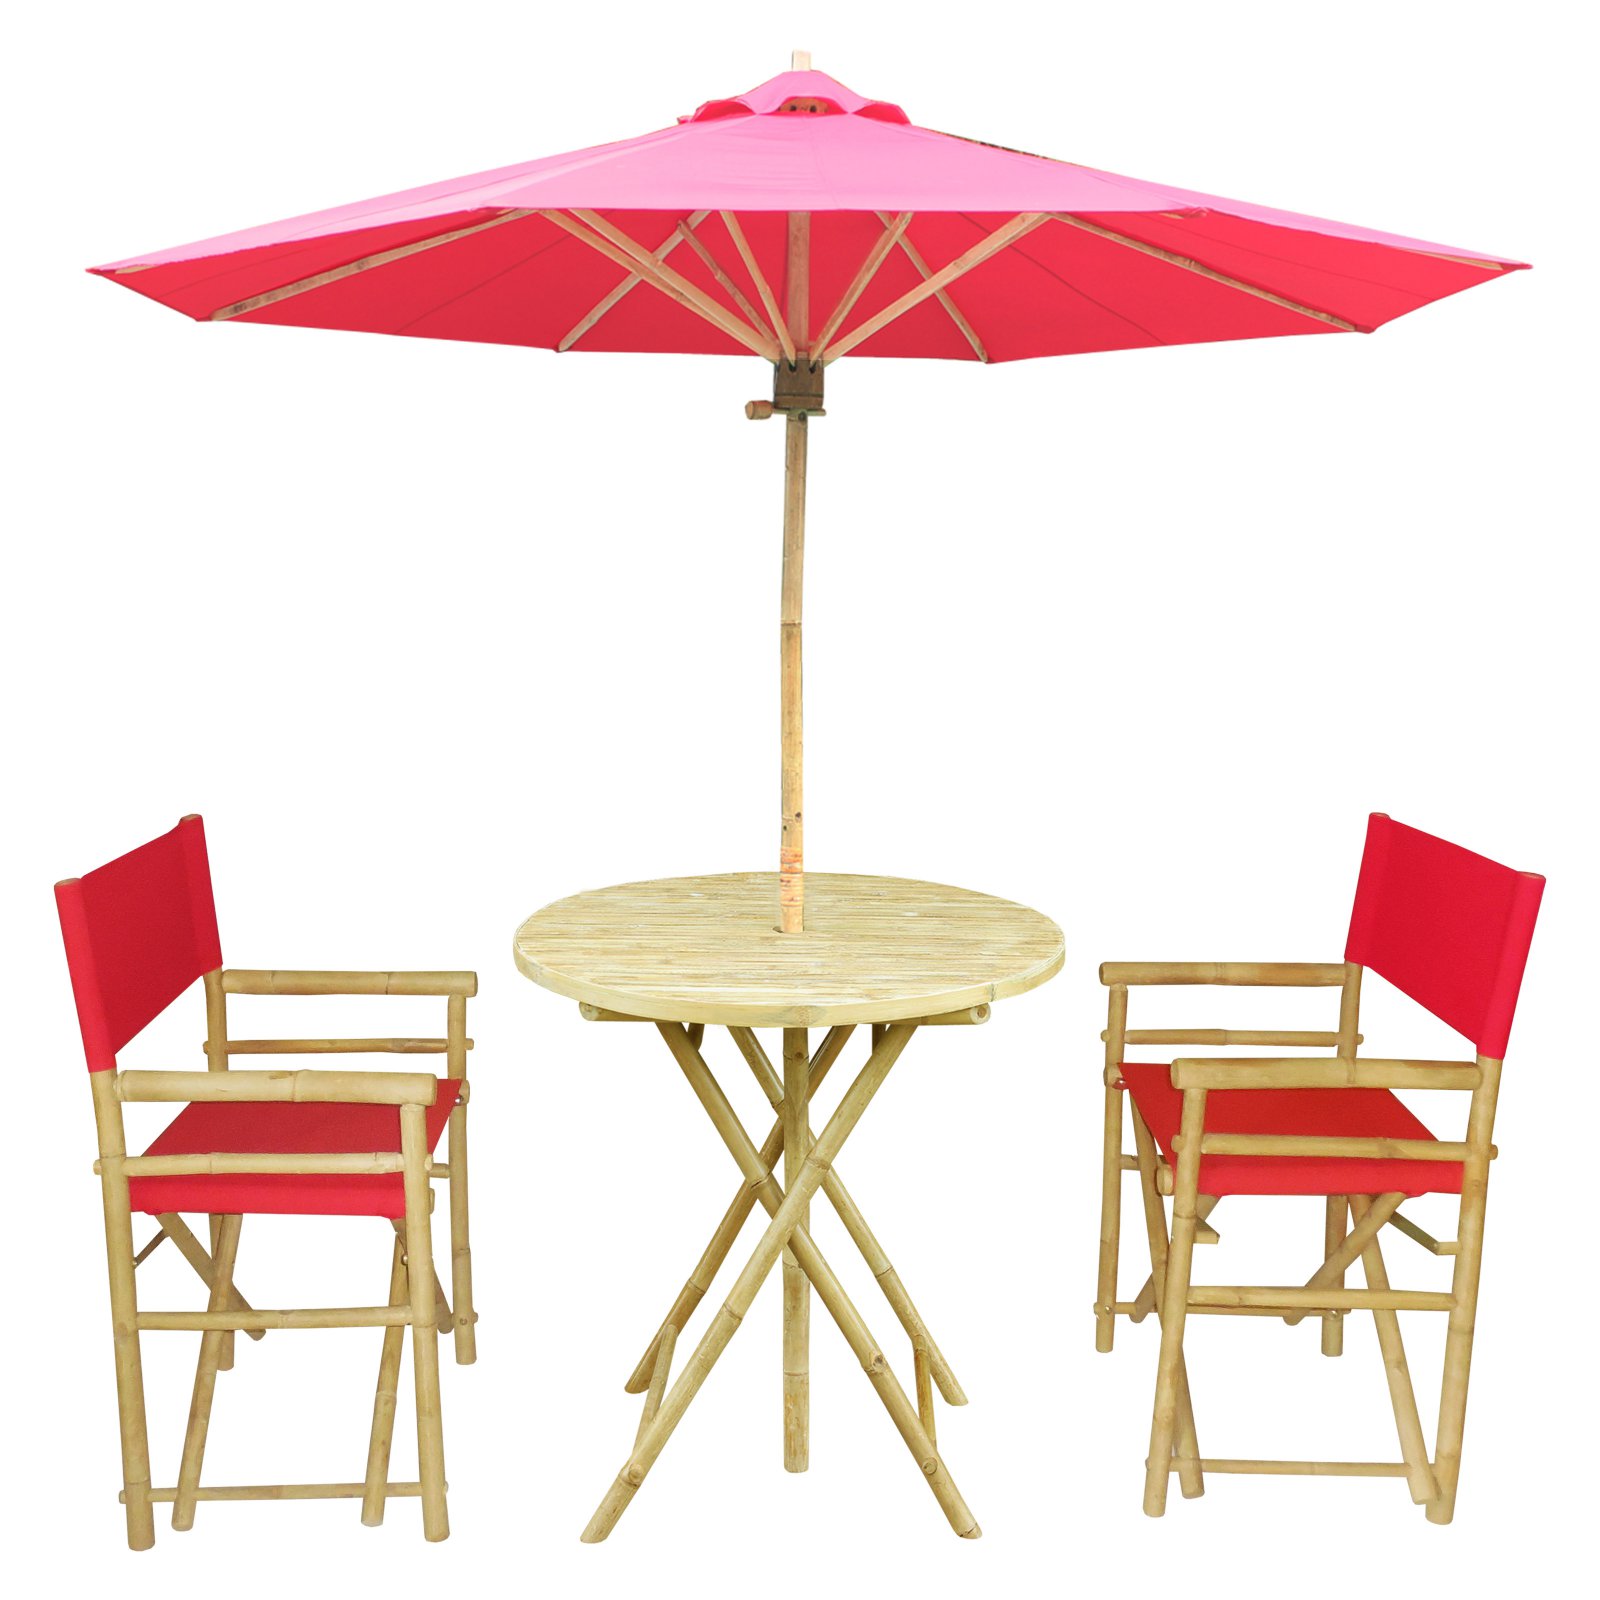 Statra Bamboo Square 3 Piece Patio Dining Set with Matching Umbrella - image 1 of 2